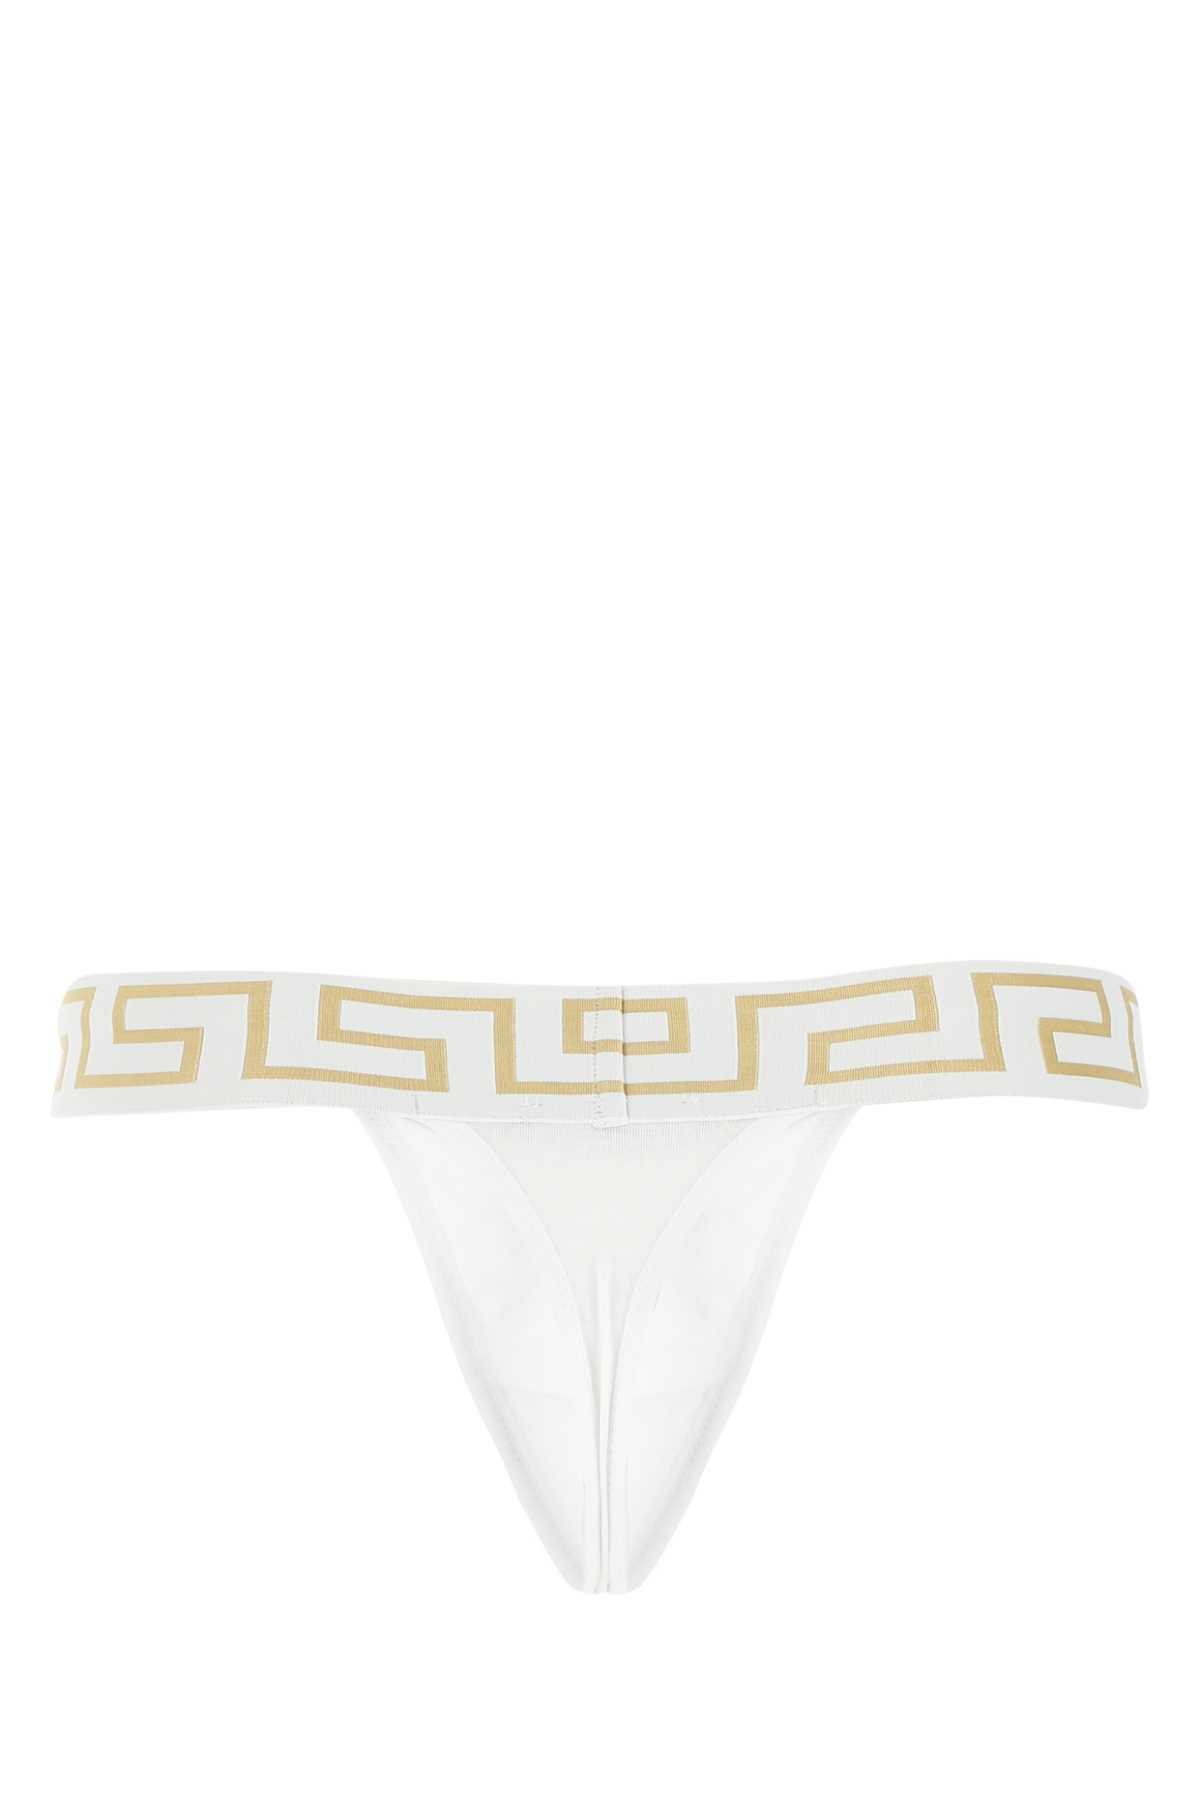 Shop Versace White Stretch Cotton Thong In A1001